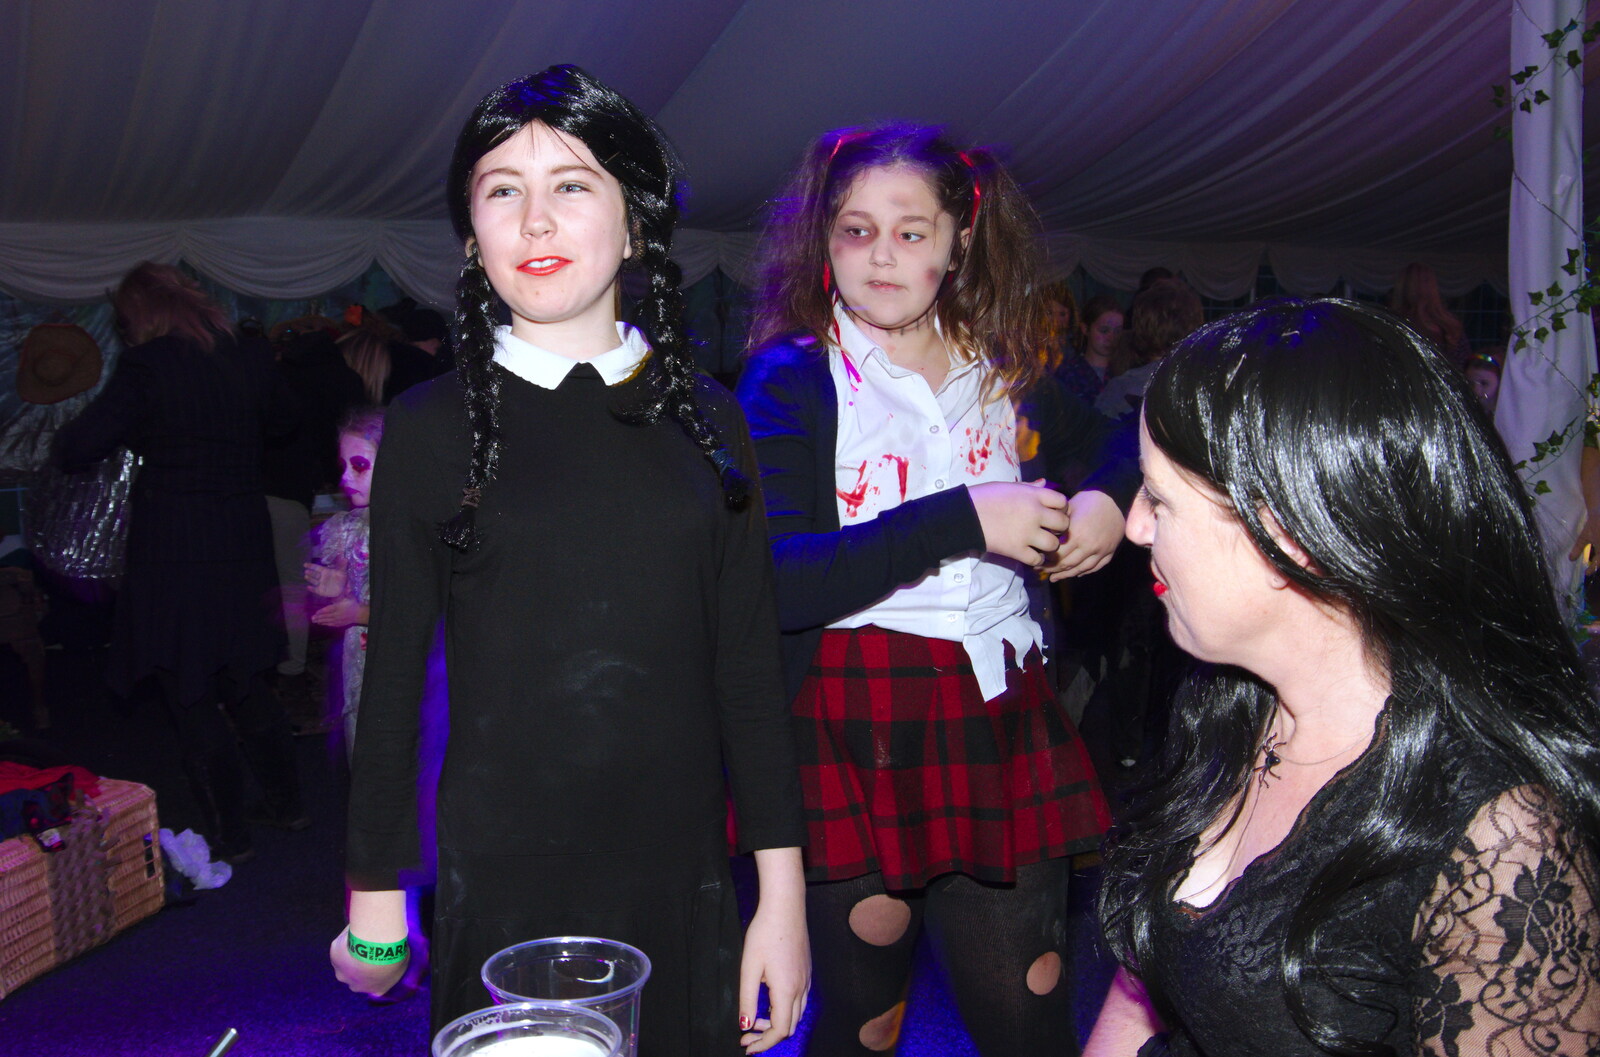 Amelia is Wednesday Addams from Day of the Dead Party at the Oaksmere, Brome, Suffolk - 2nd November 2019